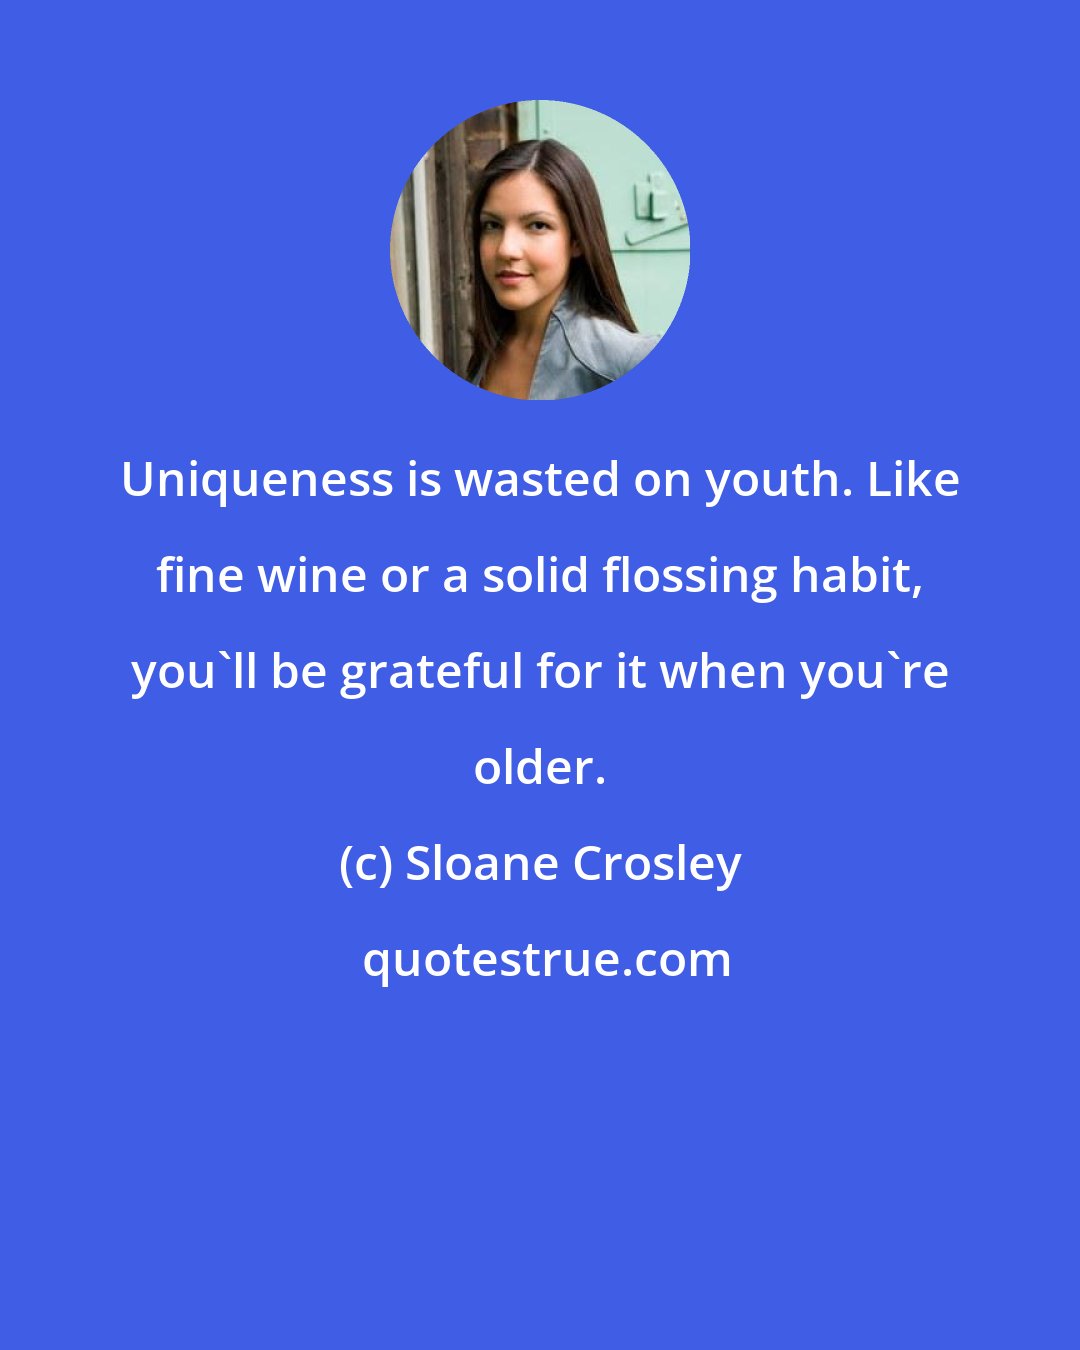 Sloane Crosley: Uniqueness is wasted on youth. Like fine wine or a solid flossing habit, you'll be grateful for it when you're older.